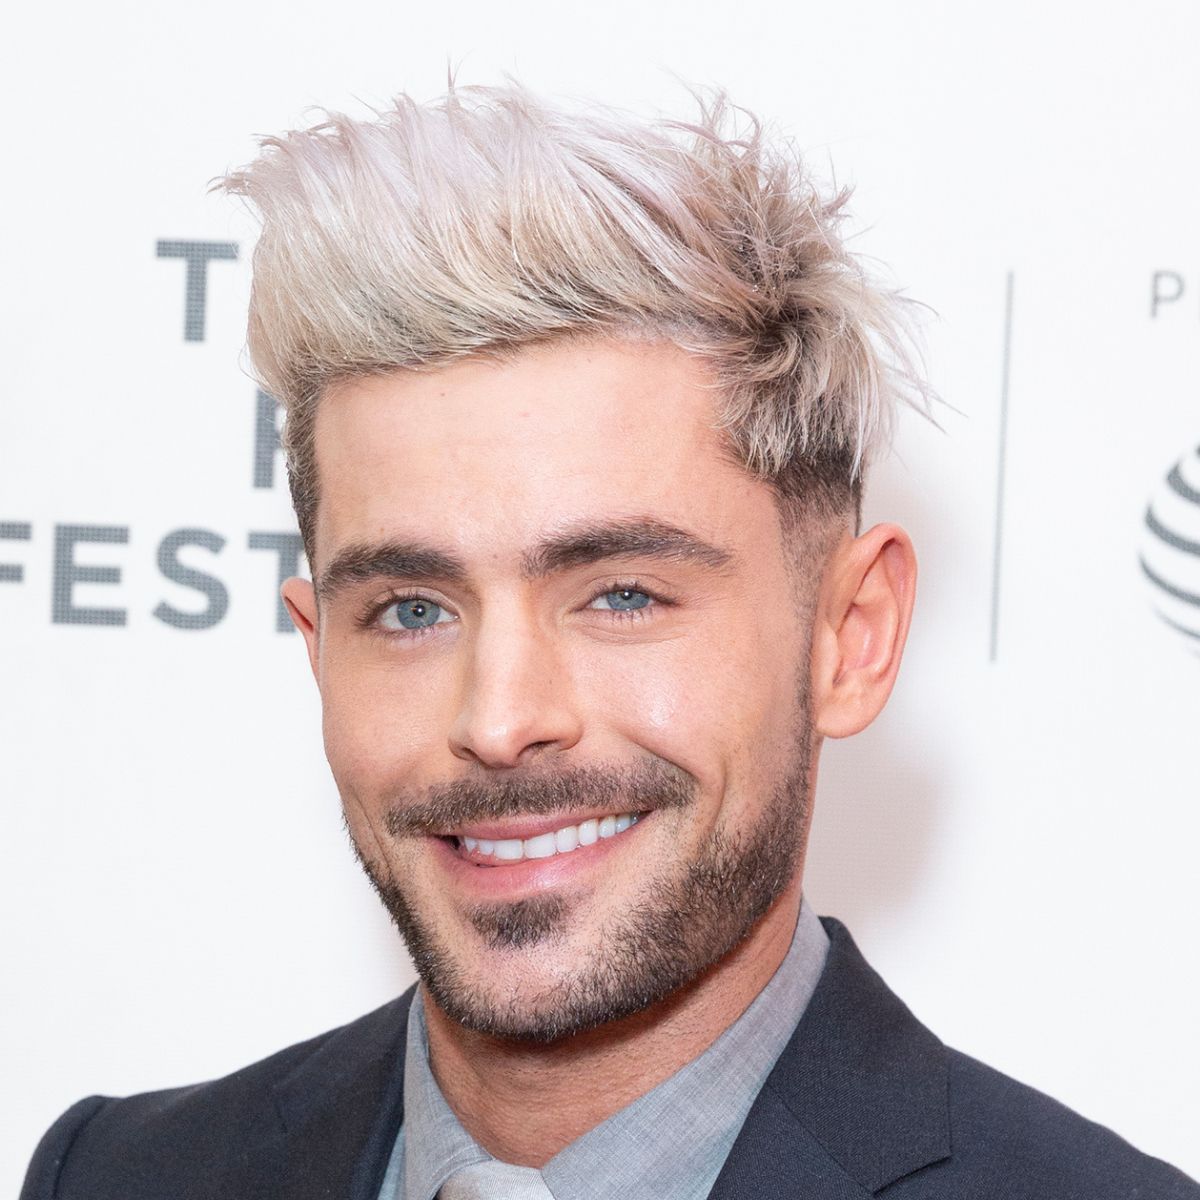 Zac Efron: Bleached Blonde Long Quiff Hairstyle